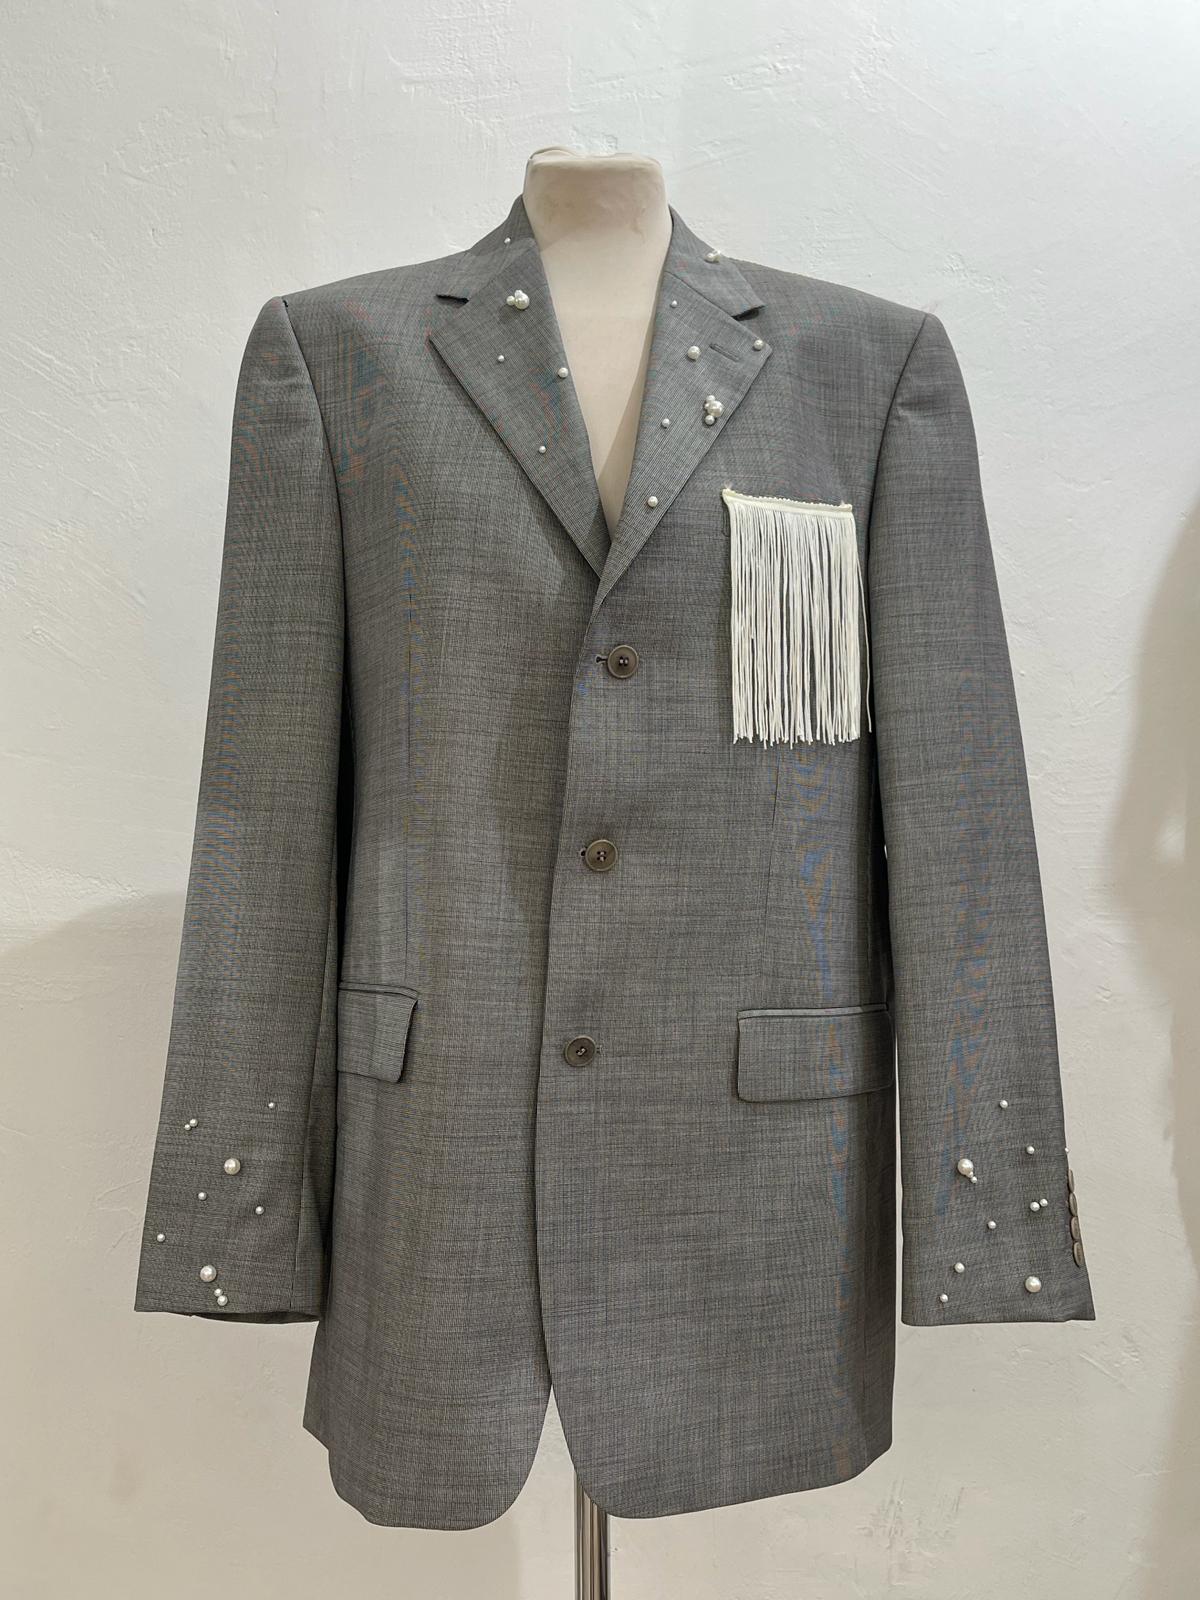 UPCYCLED COLLECTION - Pierre Cardin - Blazer